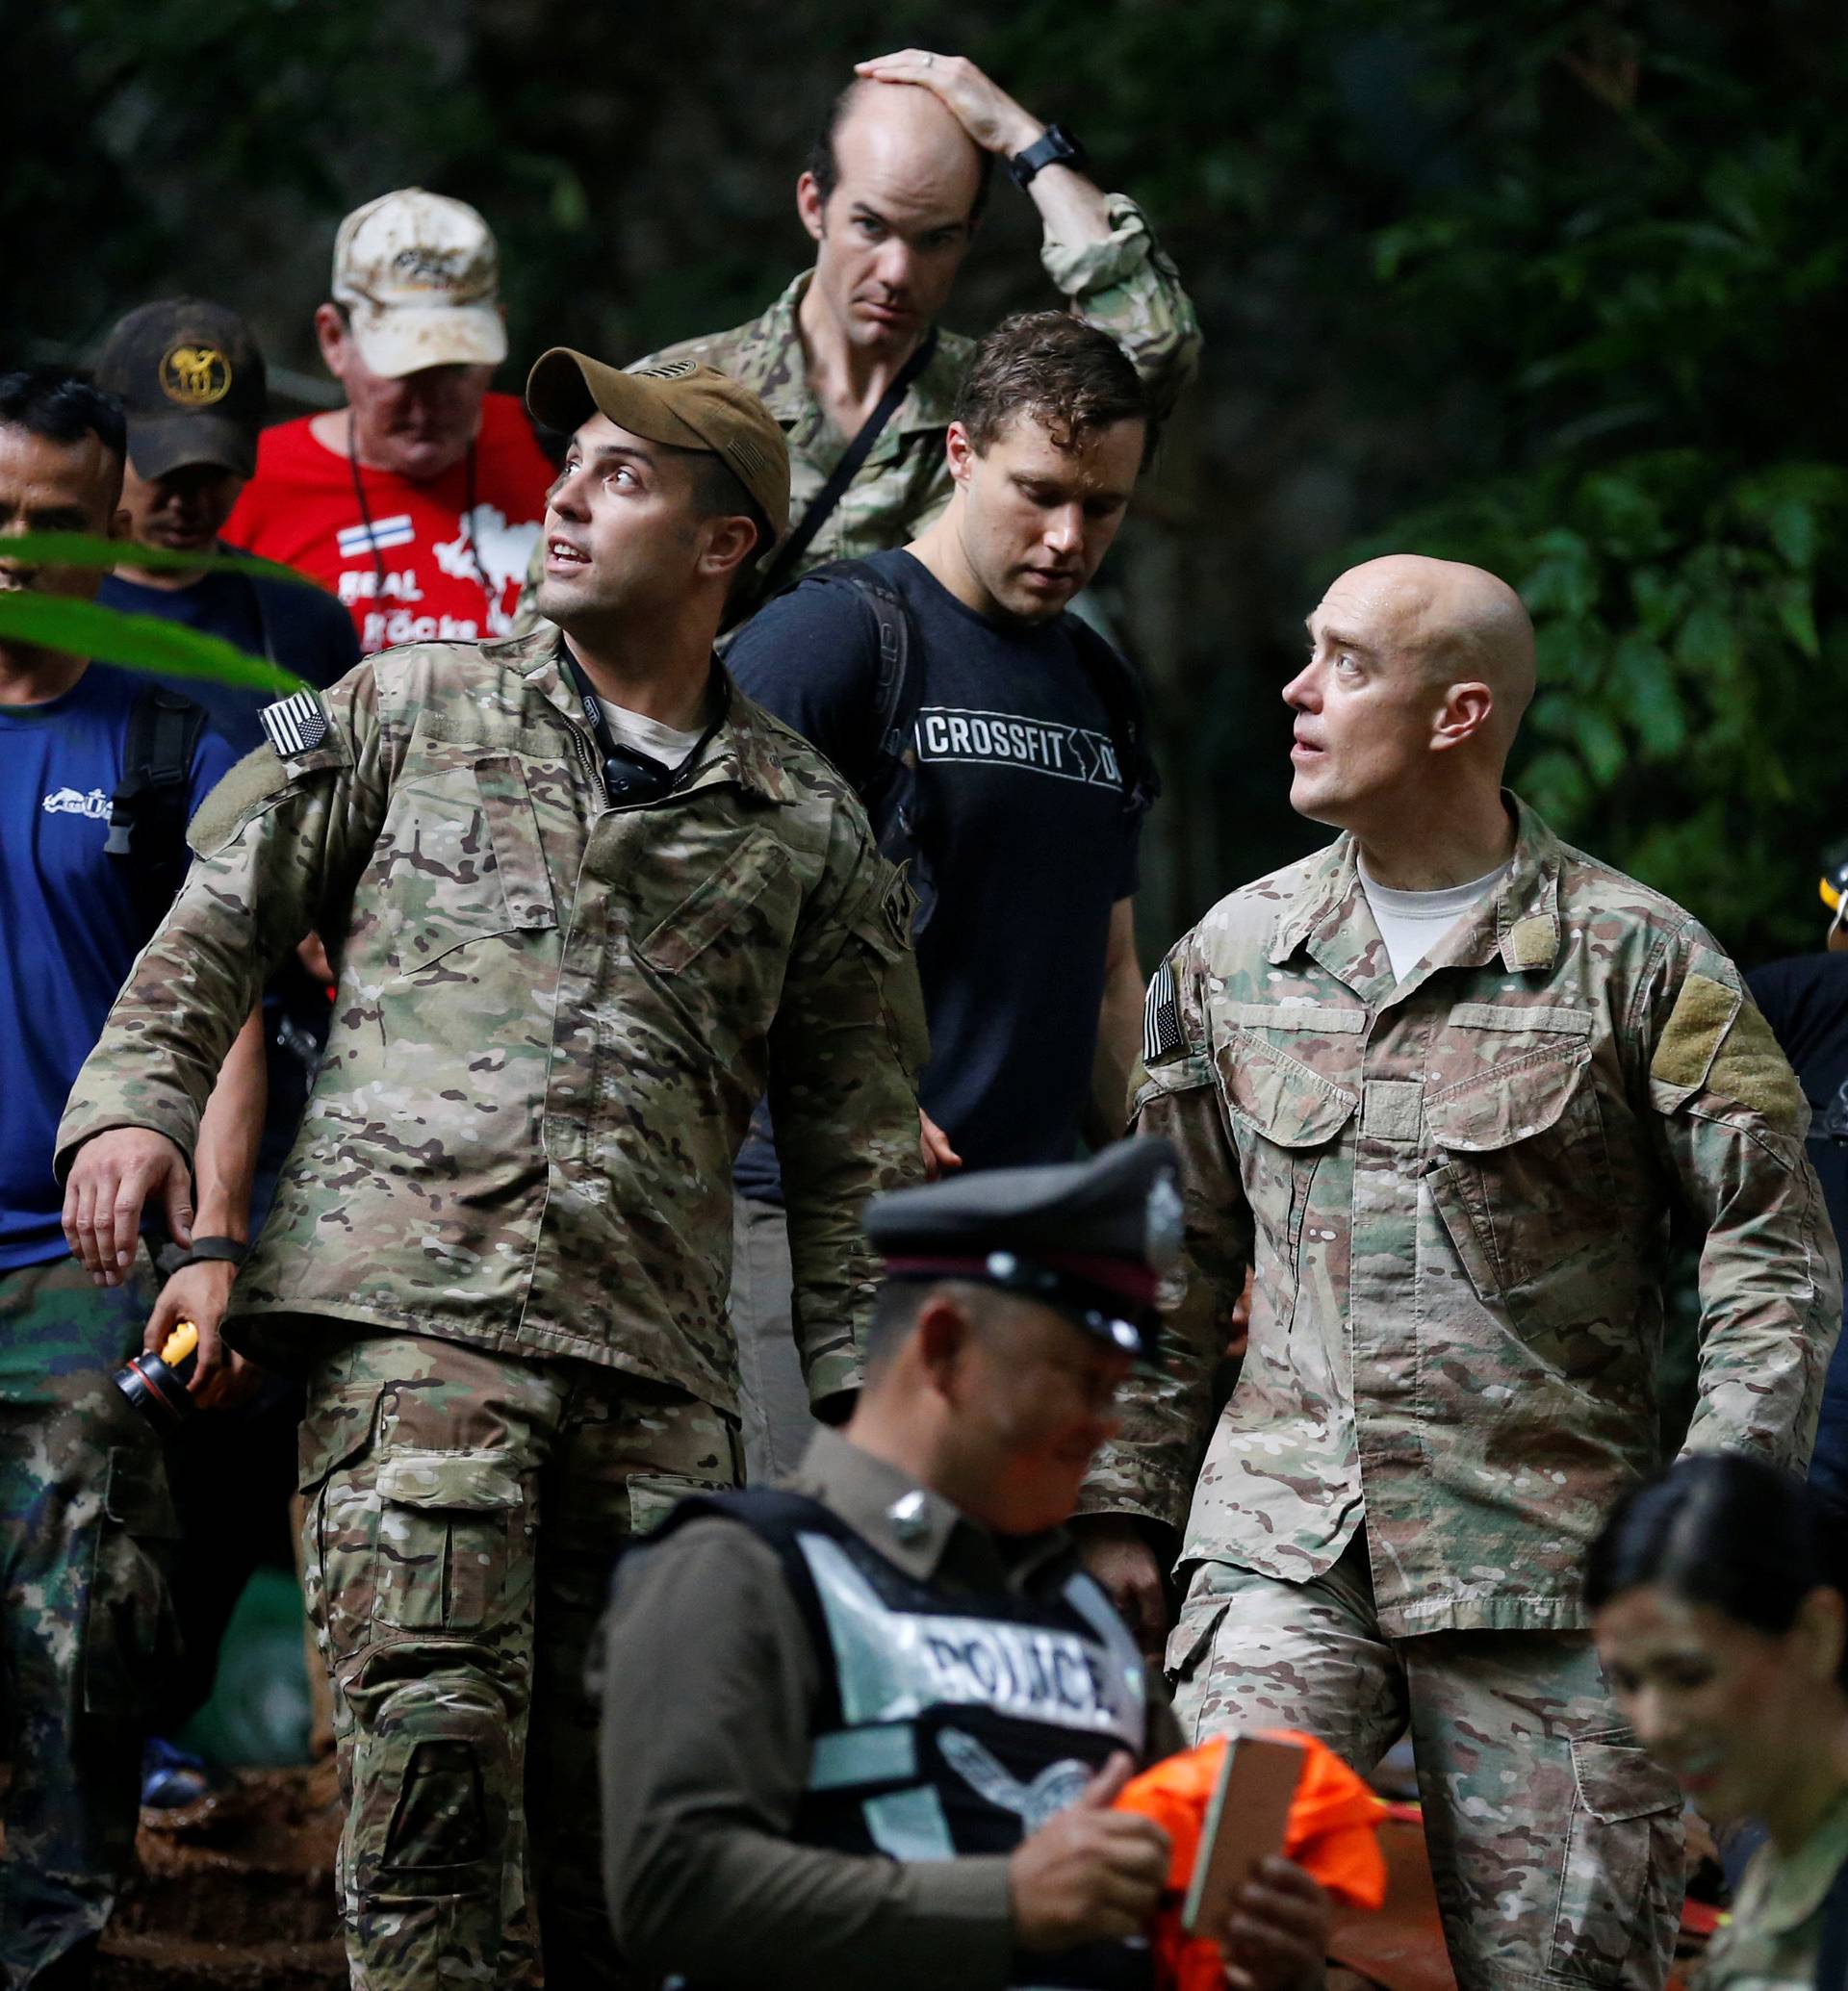 U.S. military personnel come out from Tham Luang cave complex during a search for members of an under-16 soccer team and their coach, in the northern province of Chiang Rai